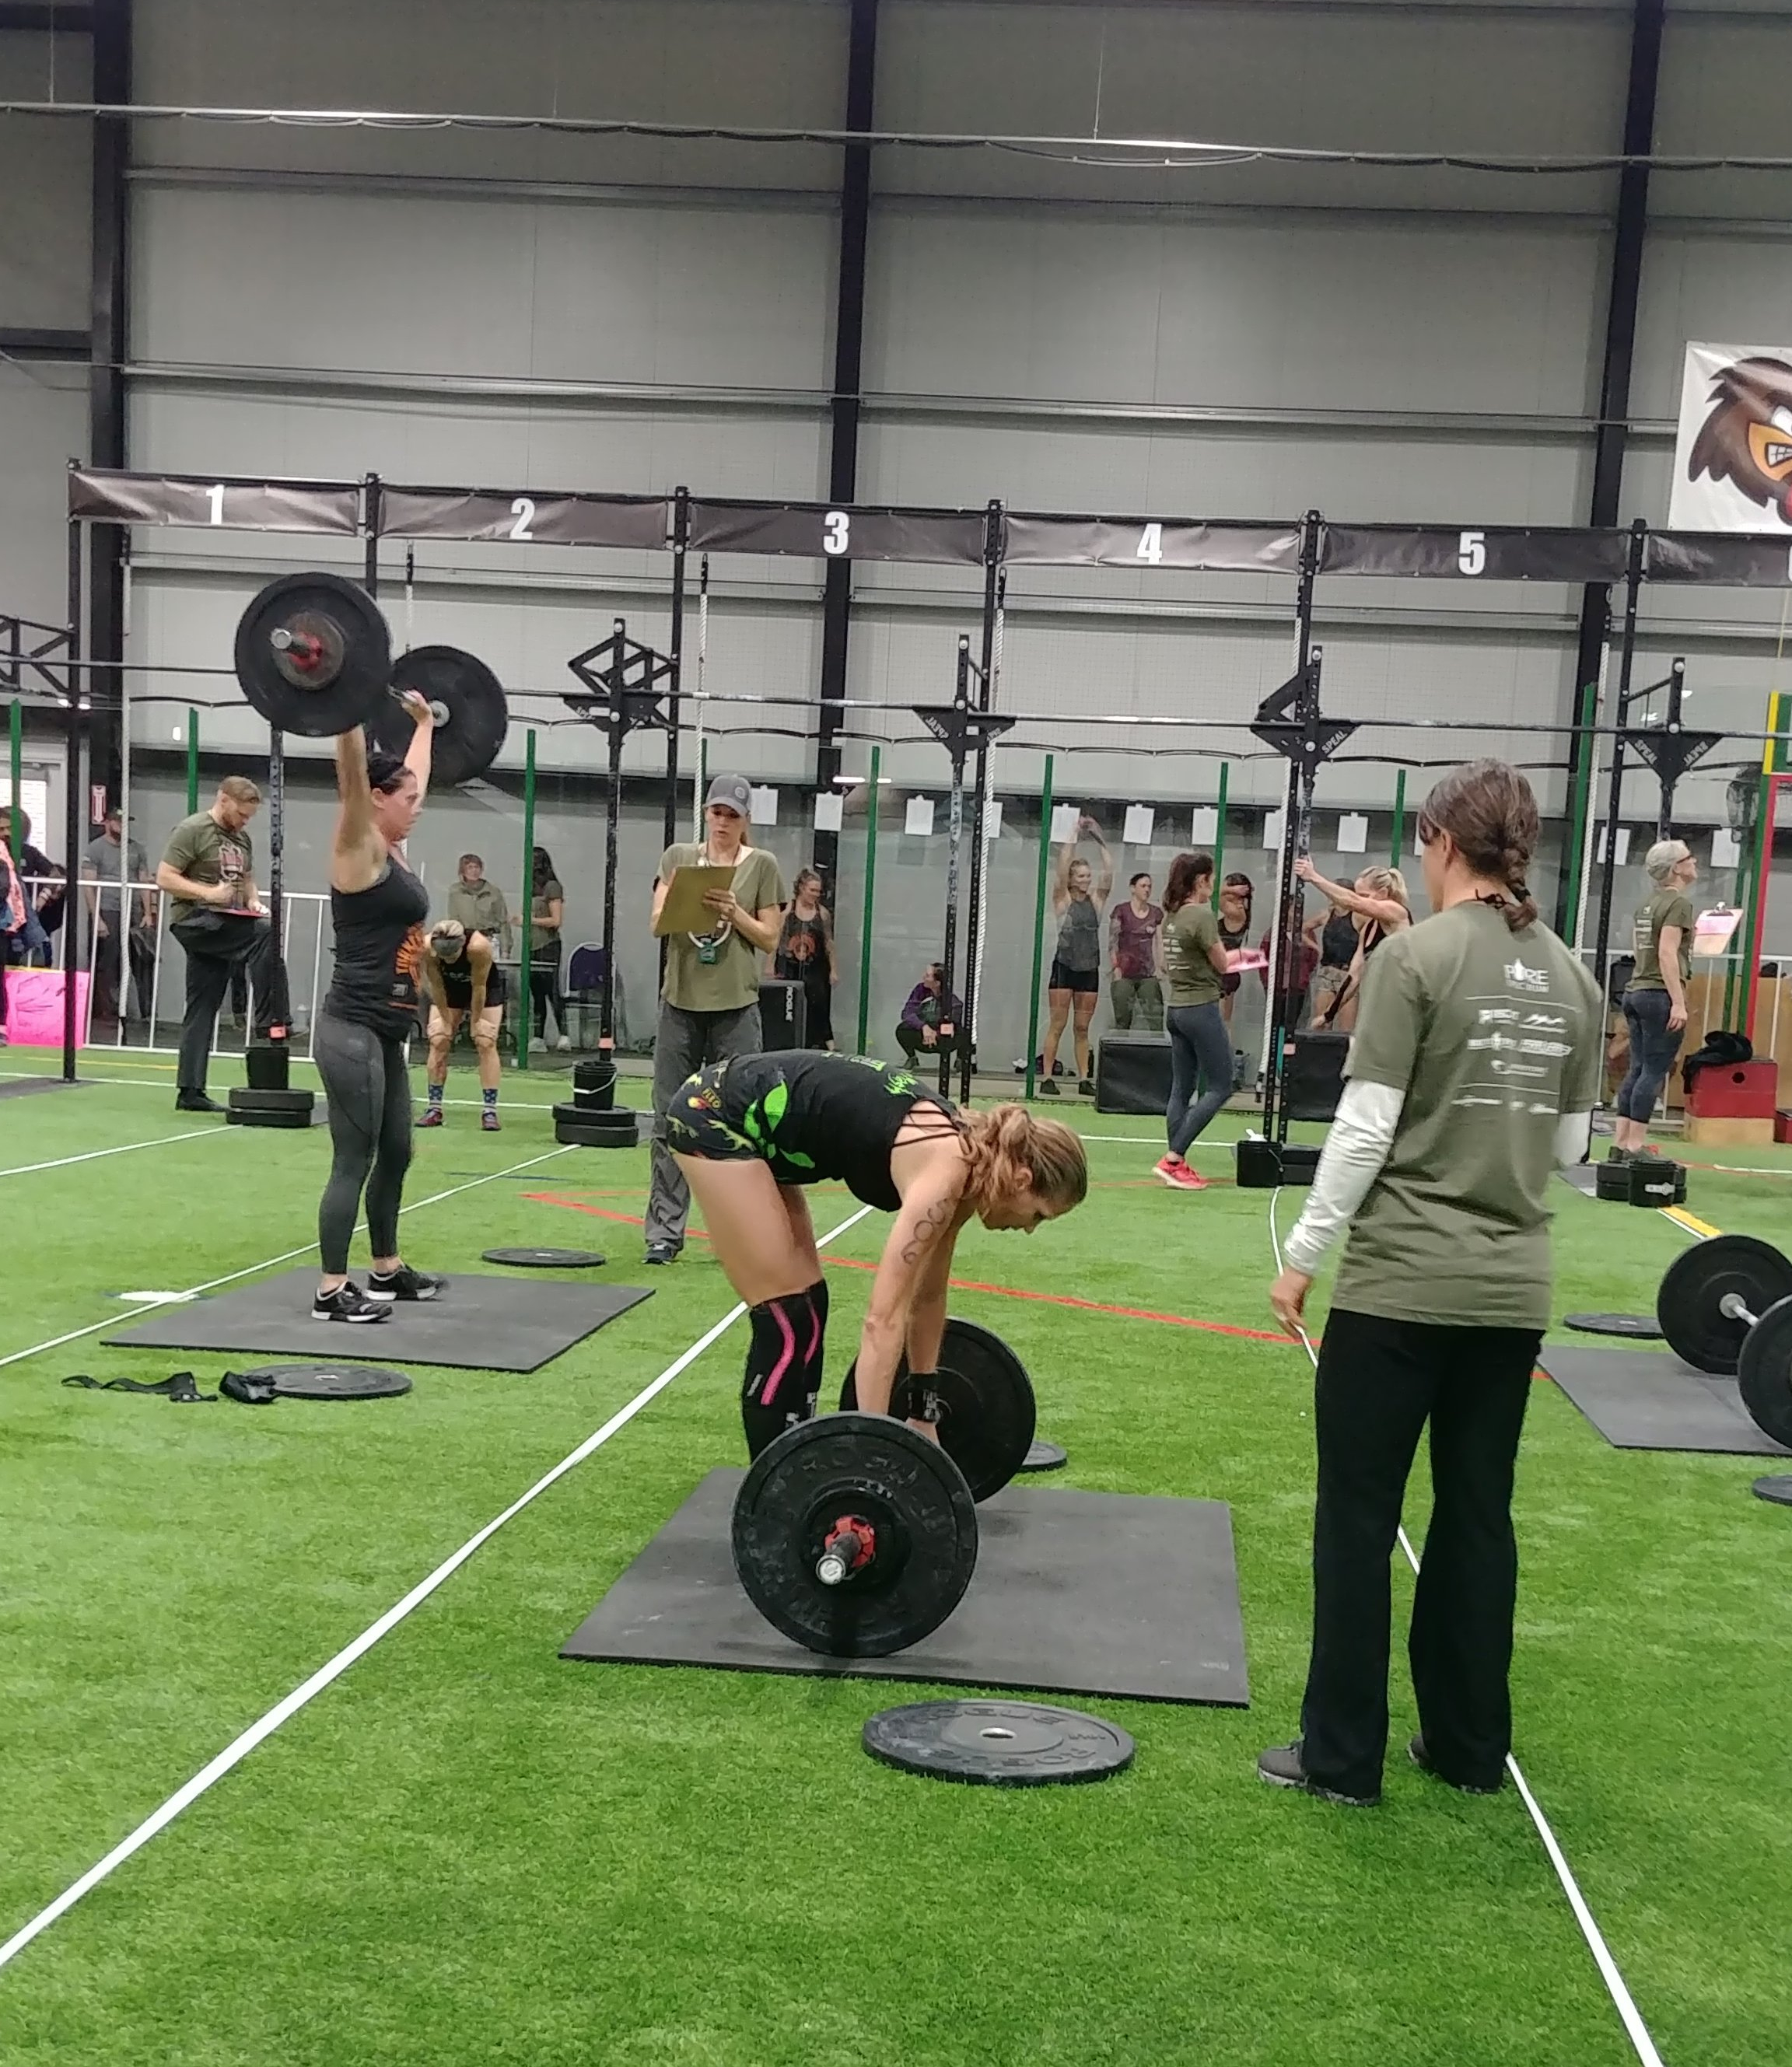 hotcrossfitchicks at local crossfit competitions in denver, co